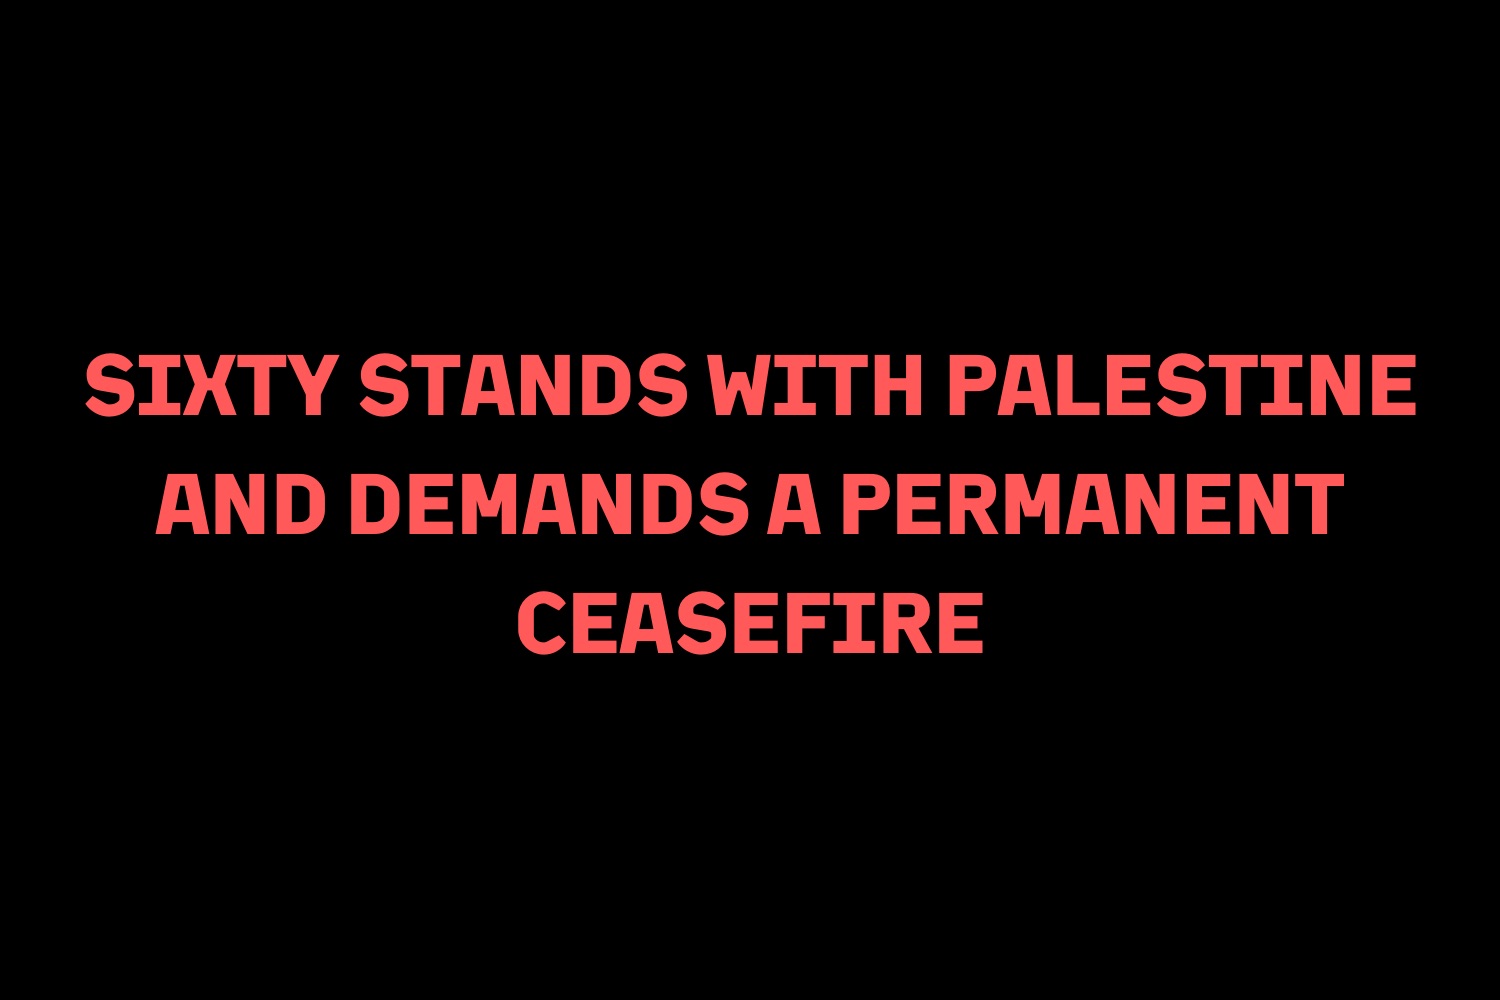 Image: A black backdrop with red text in the center that reads "SIXTY STANDS WITH PALESTINE AND DEMANDS A PERMANENT CEASEFIRE."